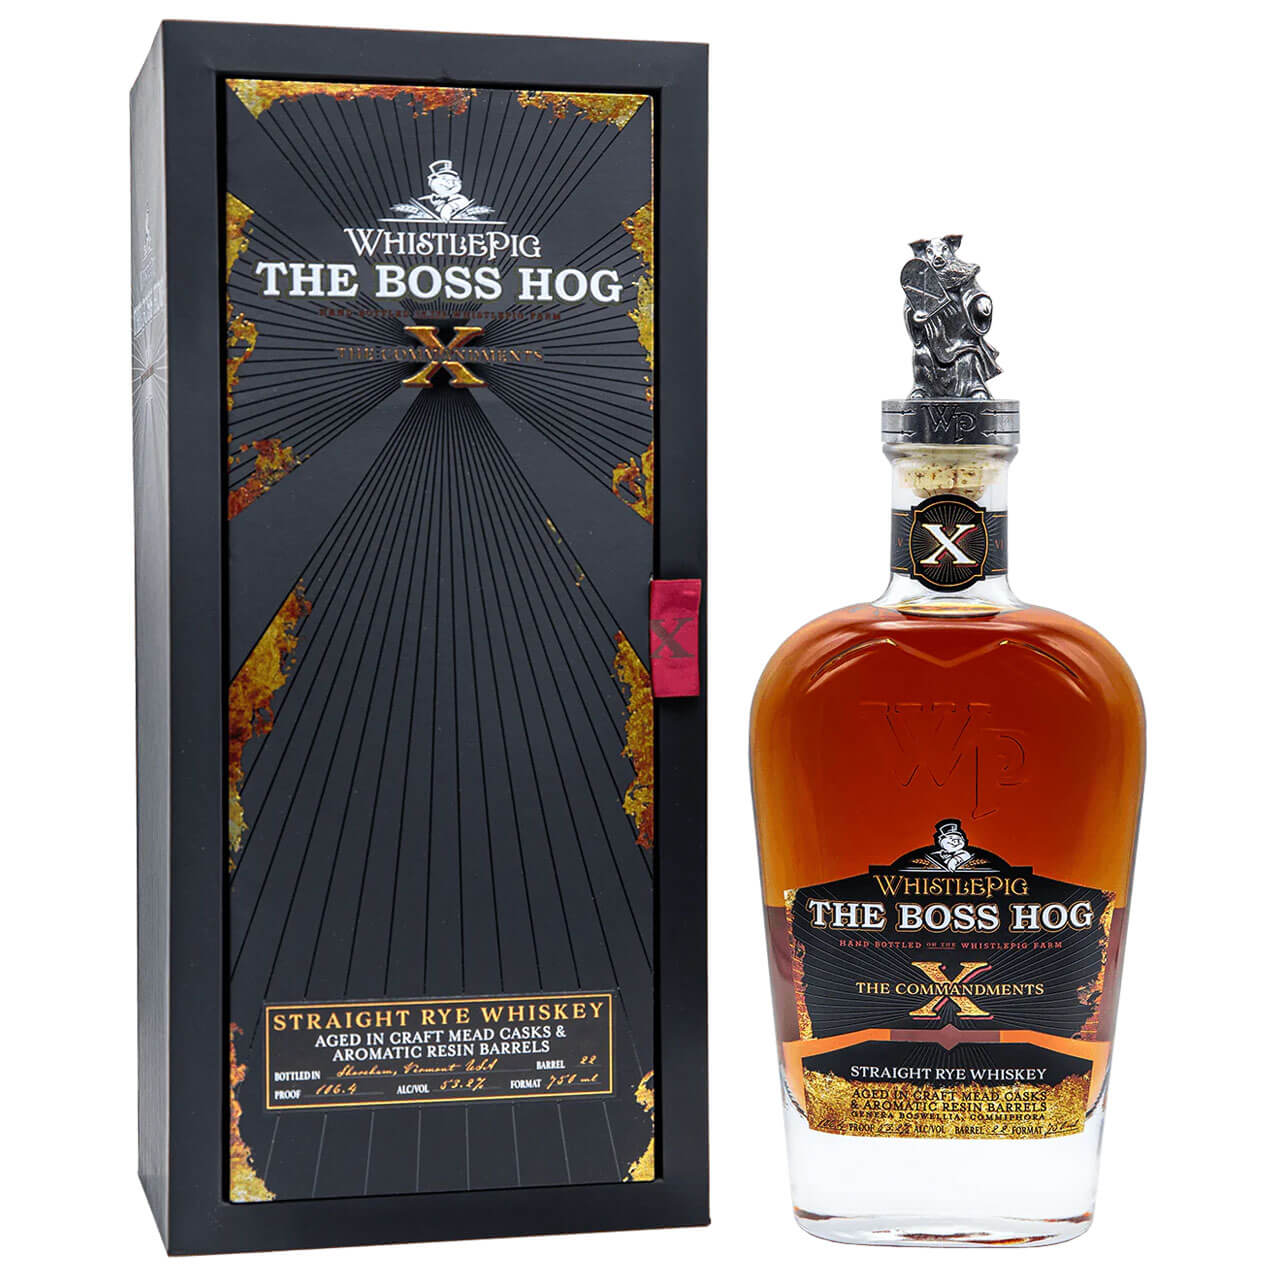 WhistlePig The Boss Hog X "The Commandments" bottle and packaging